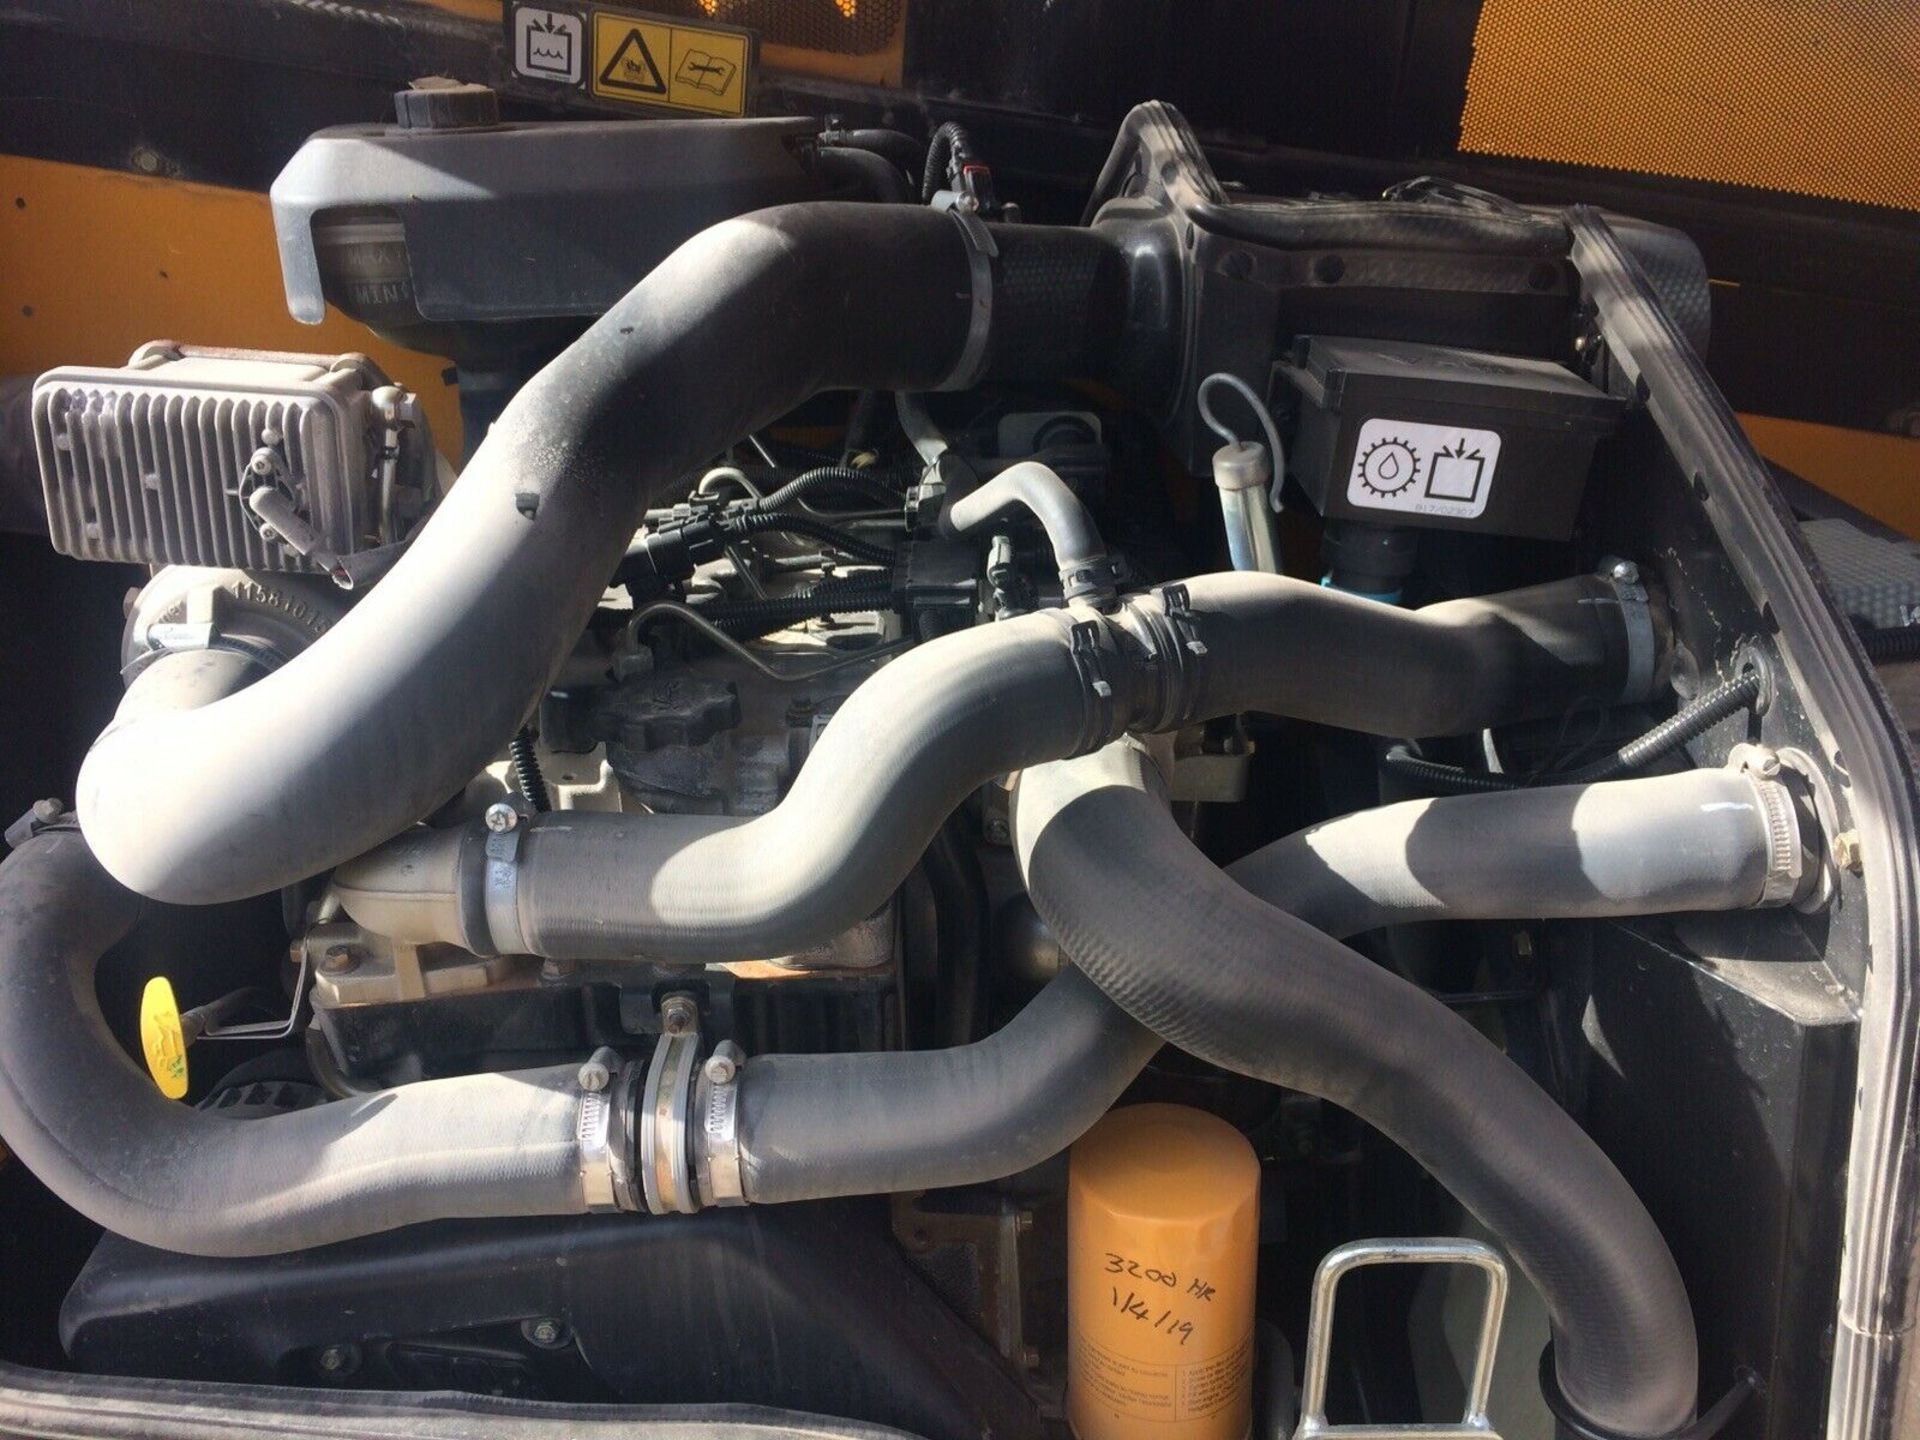 2015 T4 TURBO 535 140 JCB LOADALL AIR CON SWAY / AUX LINE / ONLY 3280 HOURS, RUNS, WORKS, LIFTS - Image 5 of 6